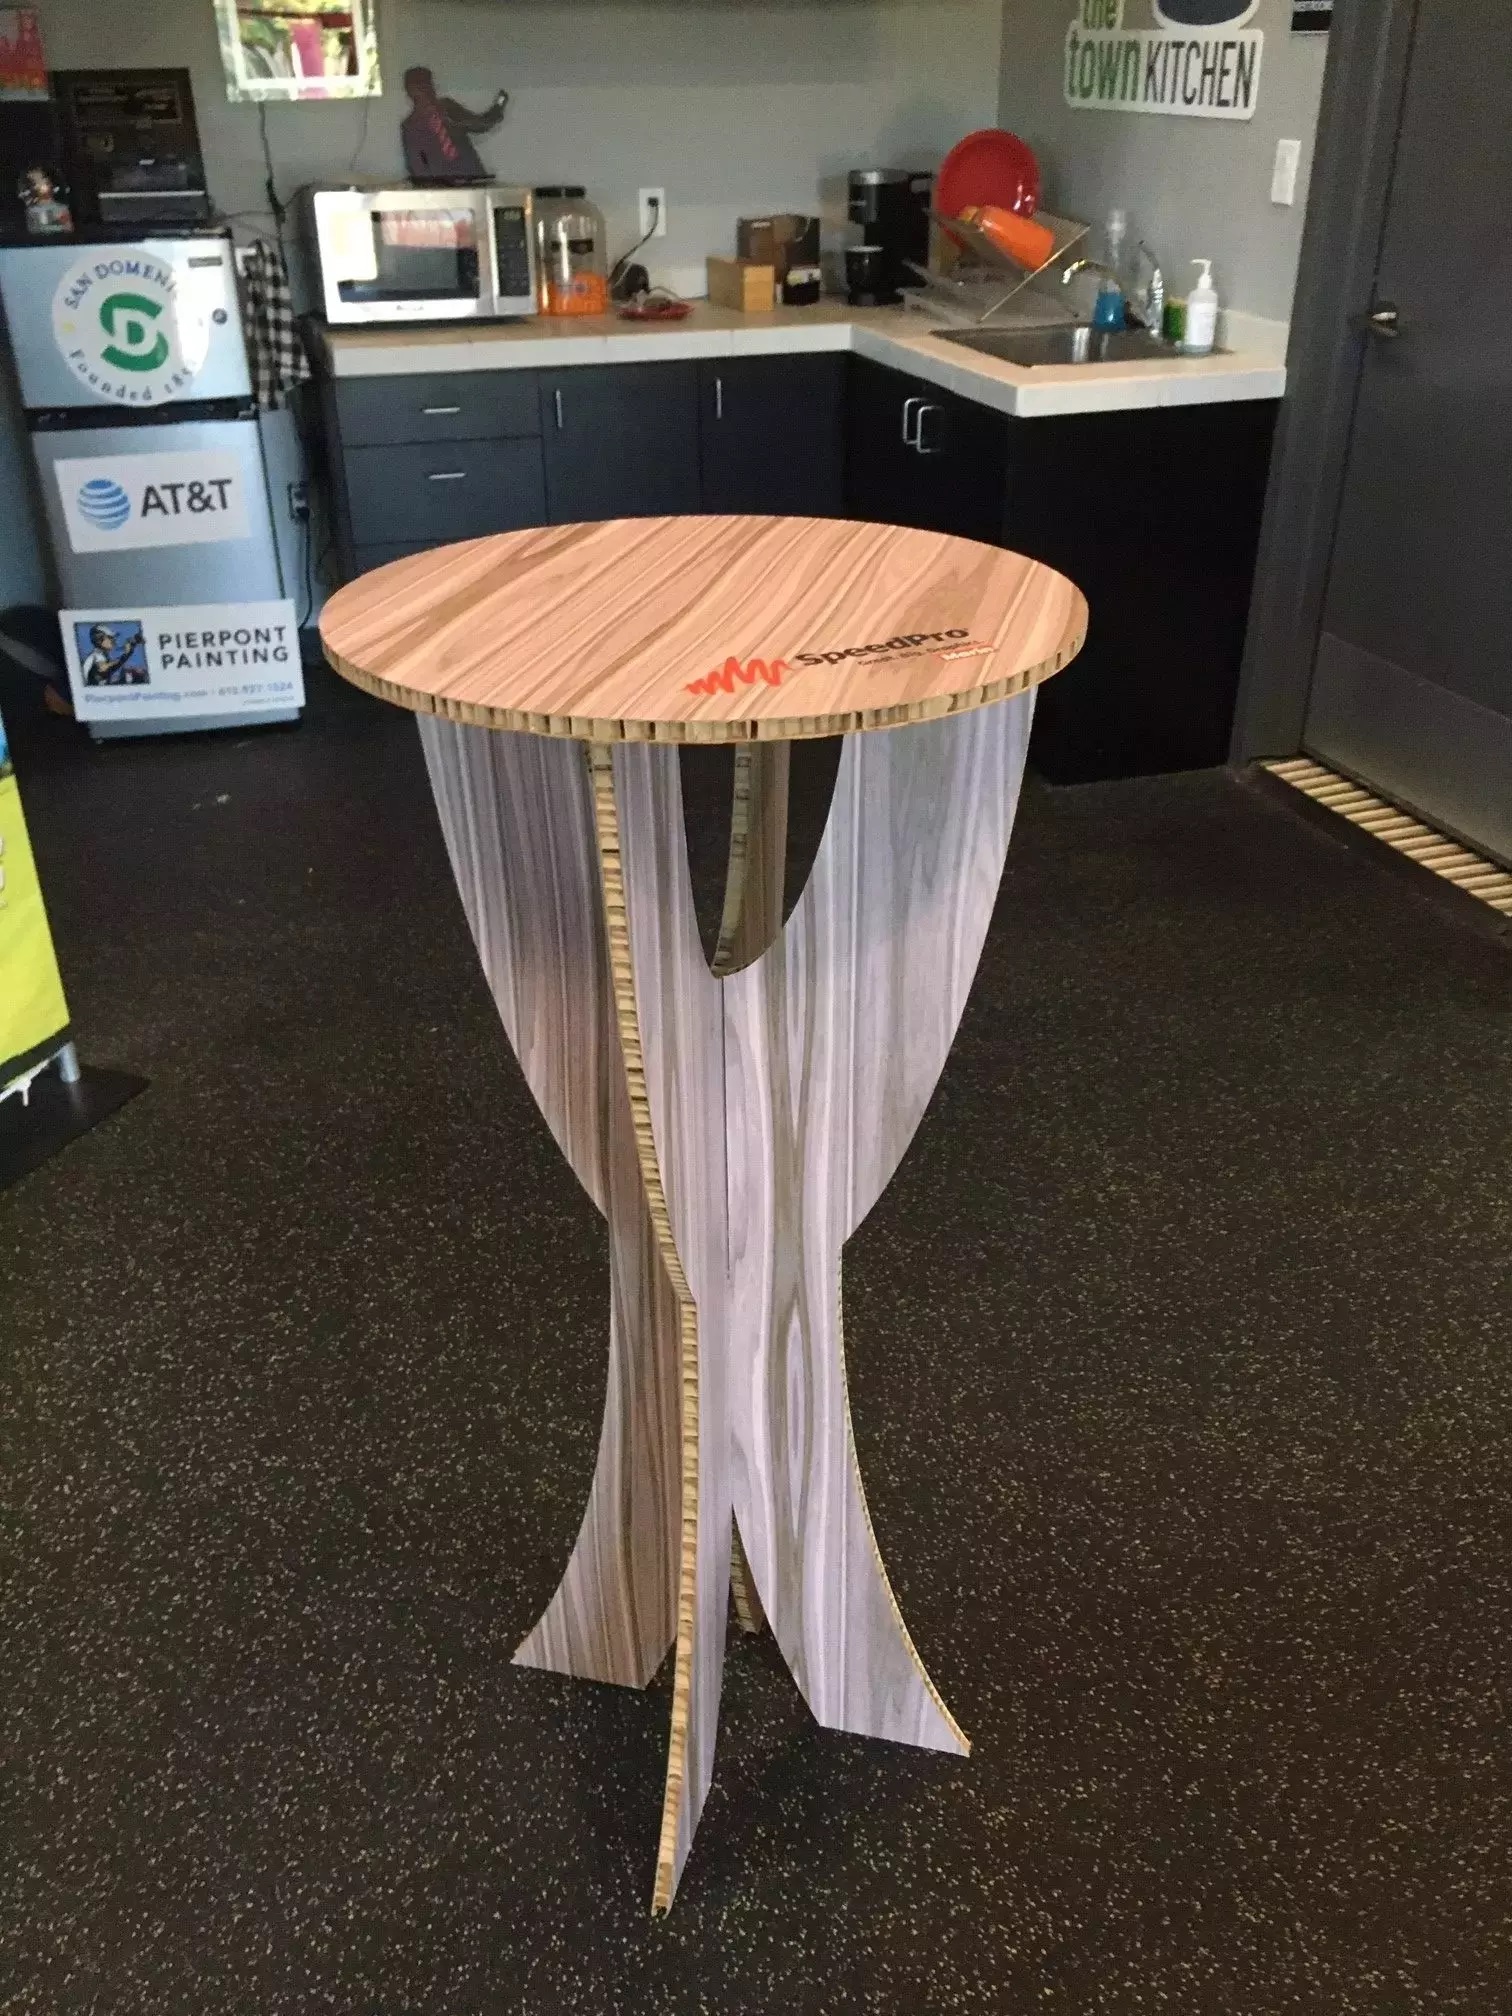 Cardboard furniture and disposable furniture for trade shows